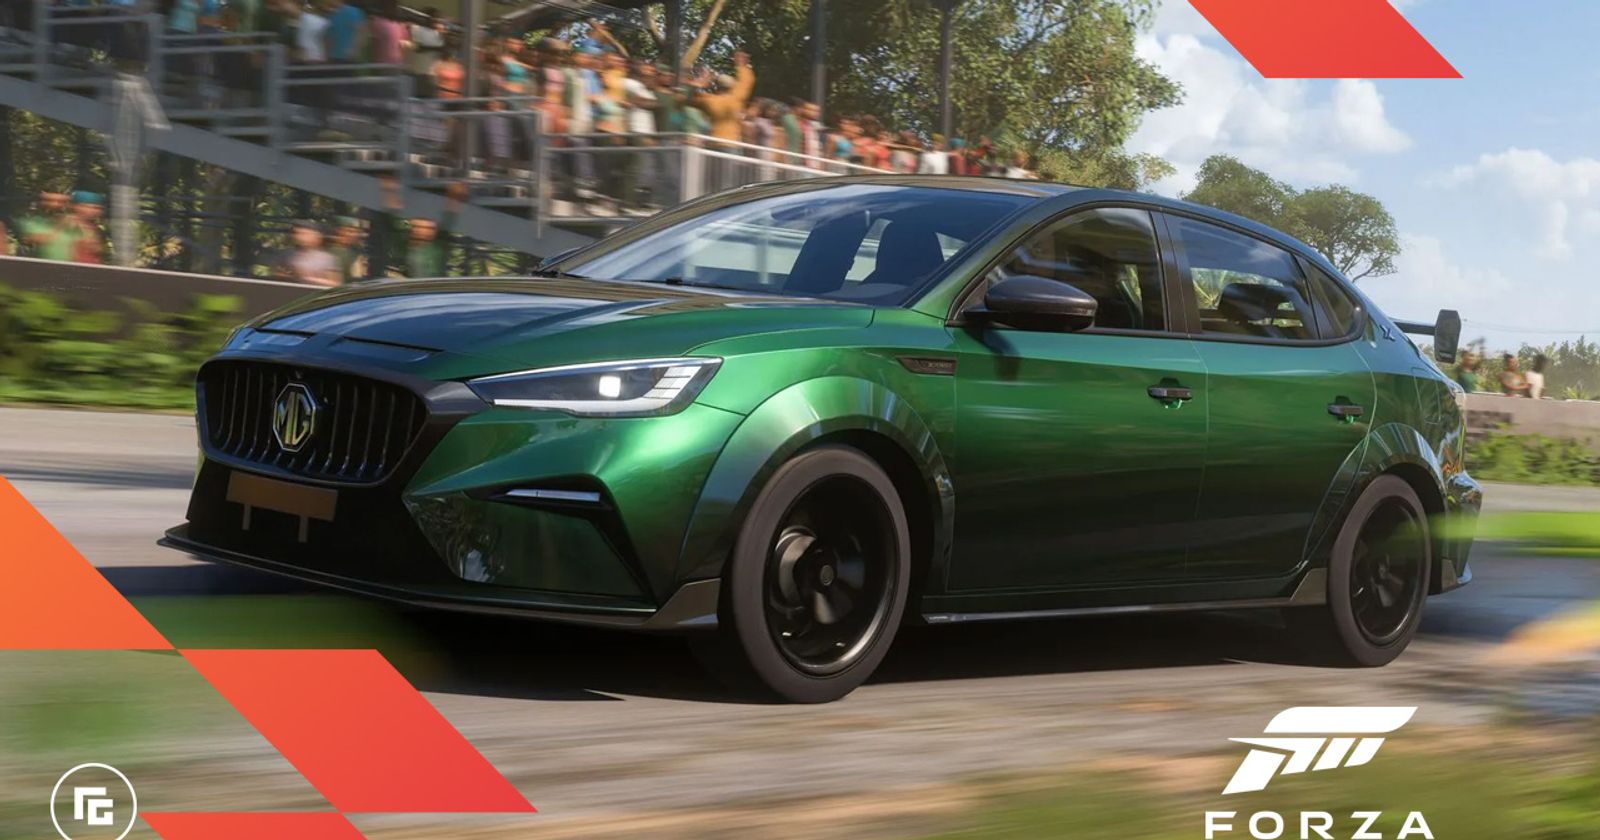 News - Expanded Forza Horizon 3 Car List Includes Iconic Utes